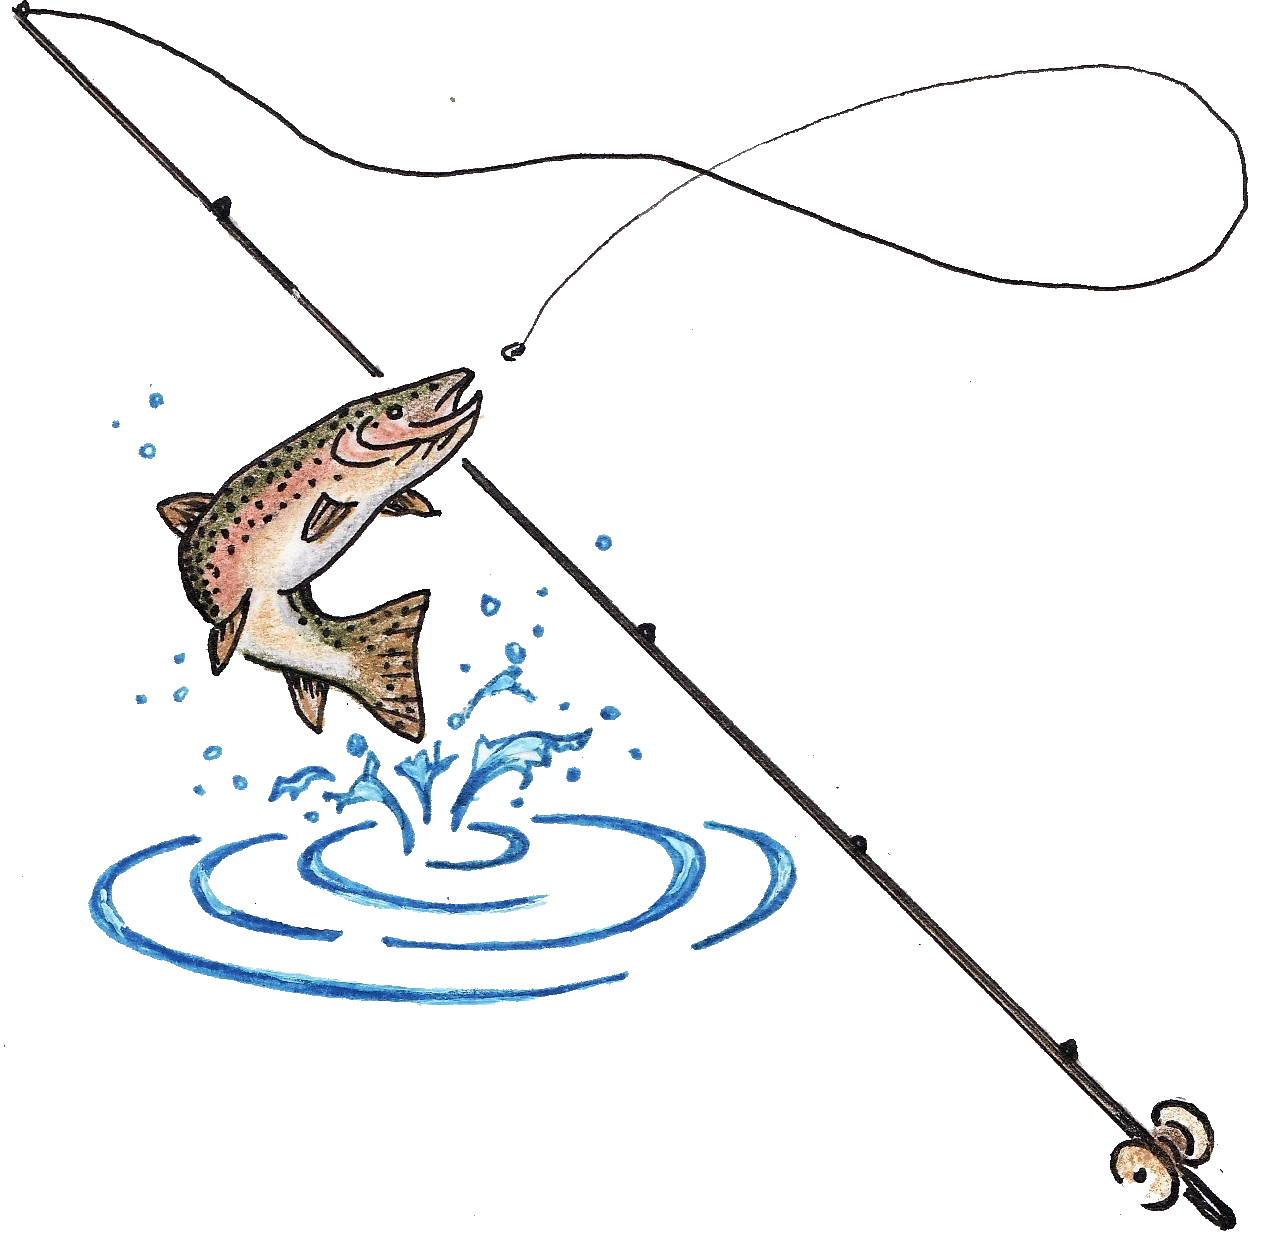 Fish clipart fishing rod. Pole images about lures